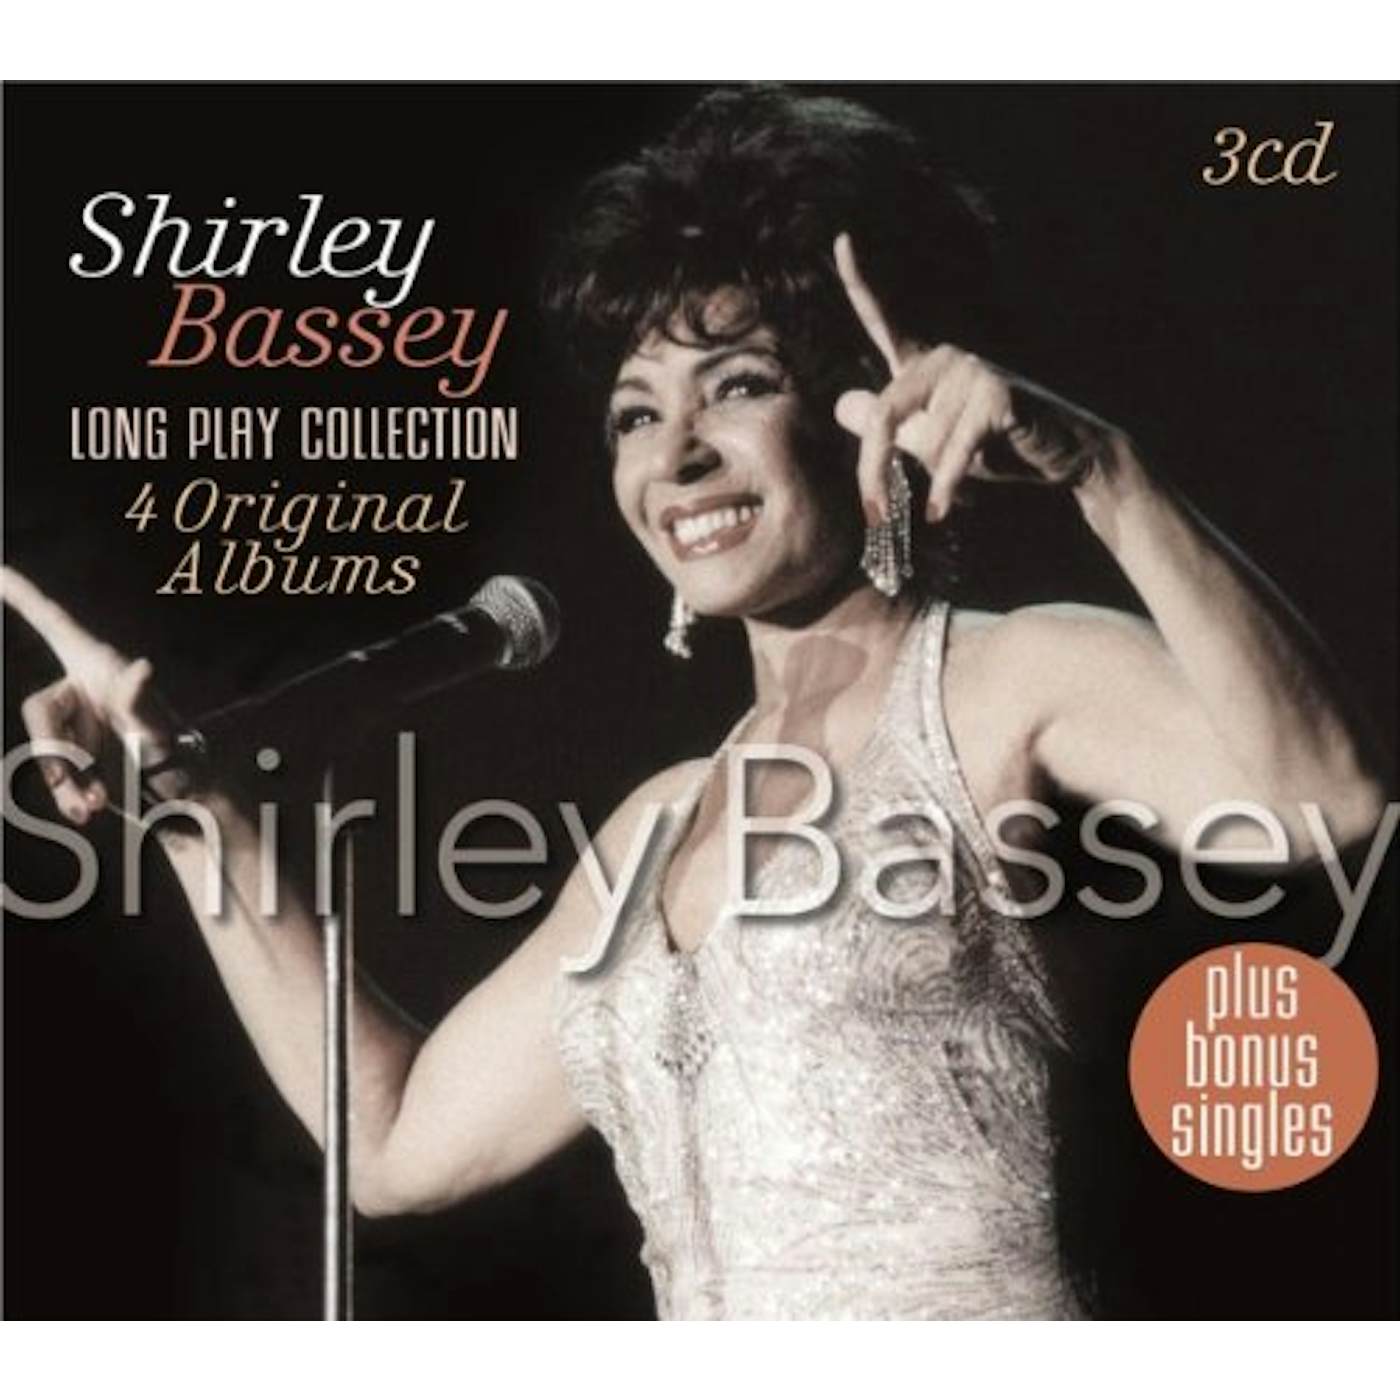 Shirley Bassey LONG PLAY COLLECTION CD